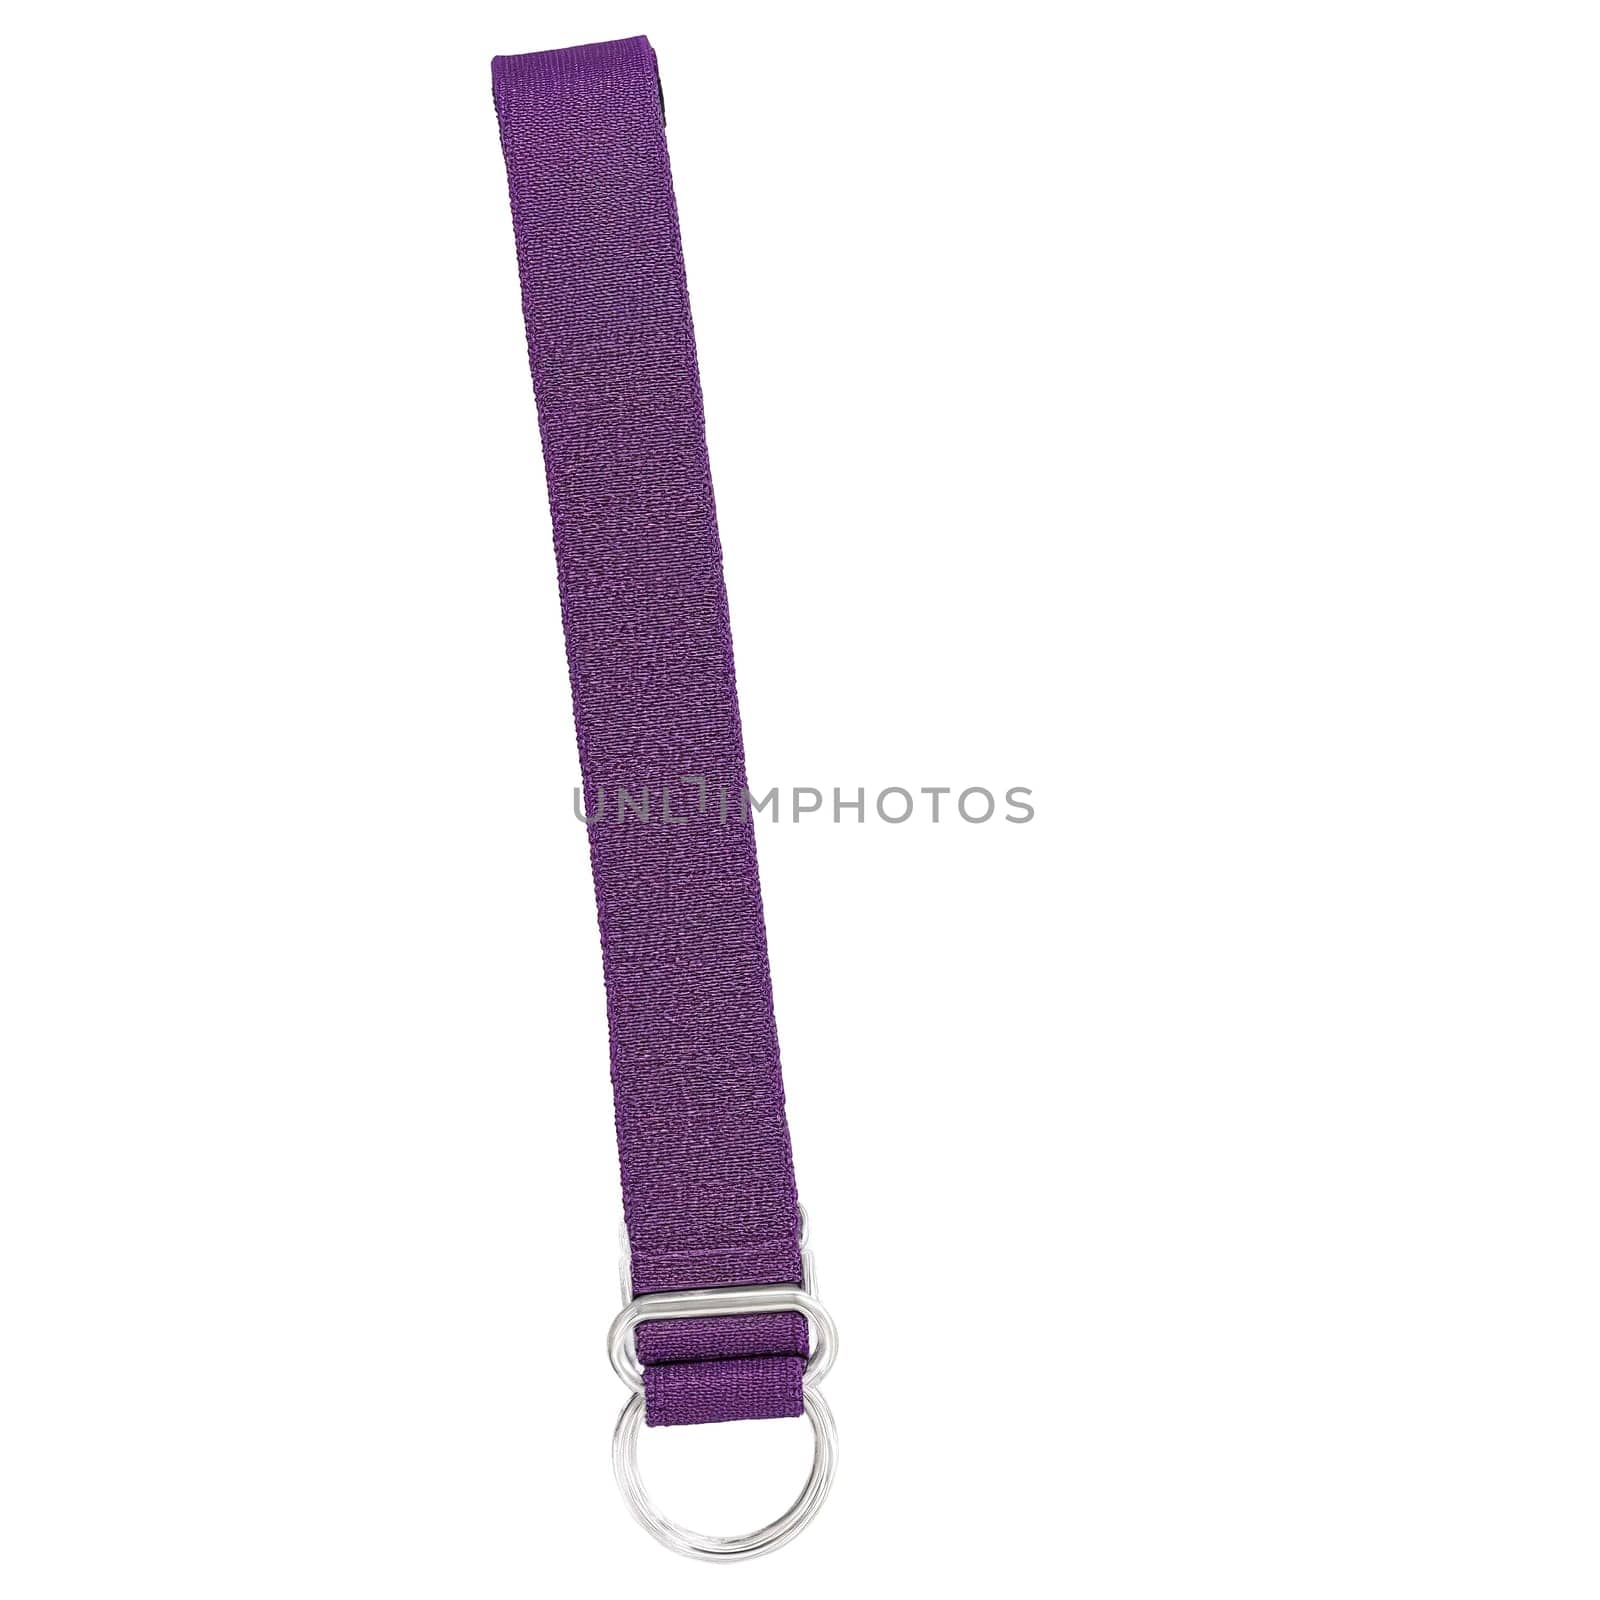 Yoga Strap long purple woven strap with a silver D ring buckle folded in half by panophotograph